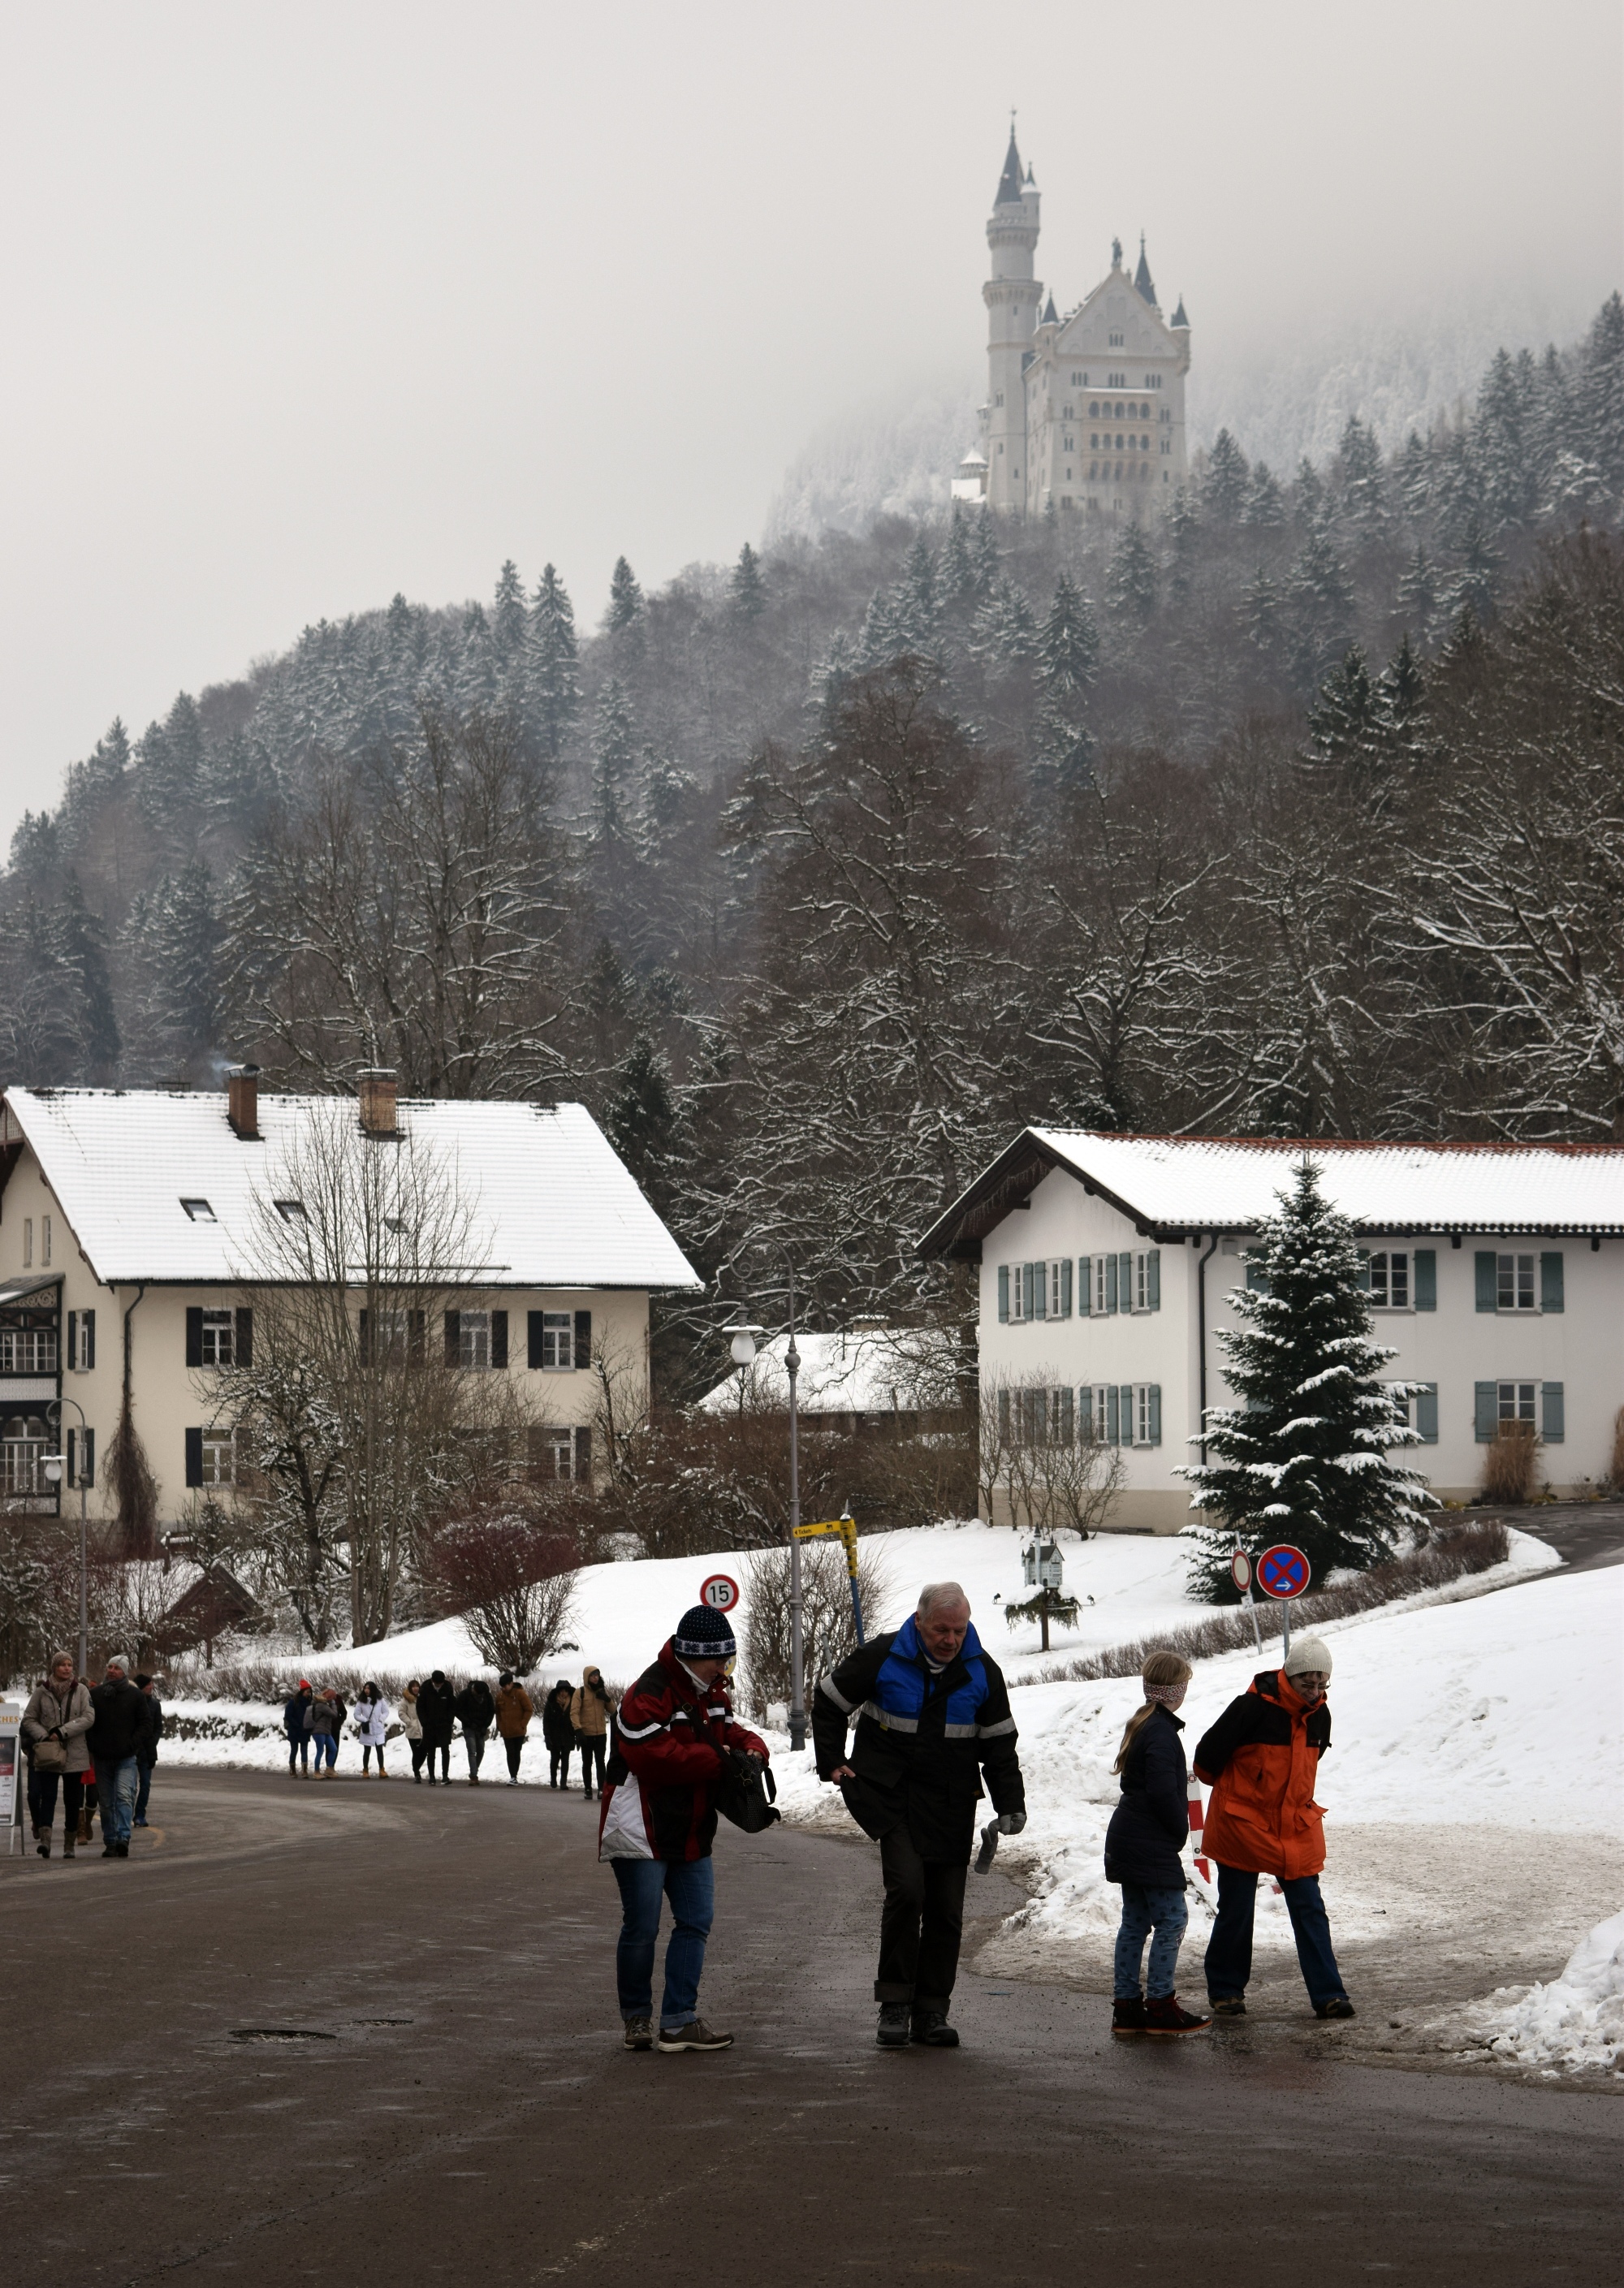 An attempt at getting the best photo of Neuschwanstein Castle, with tourists on a road in the foreground.